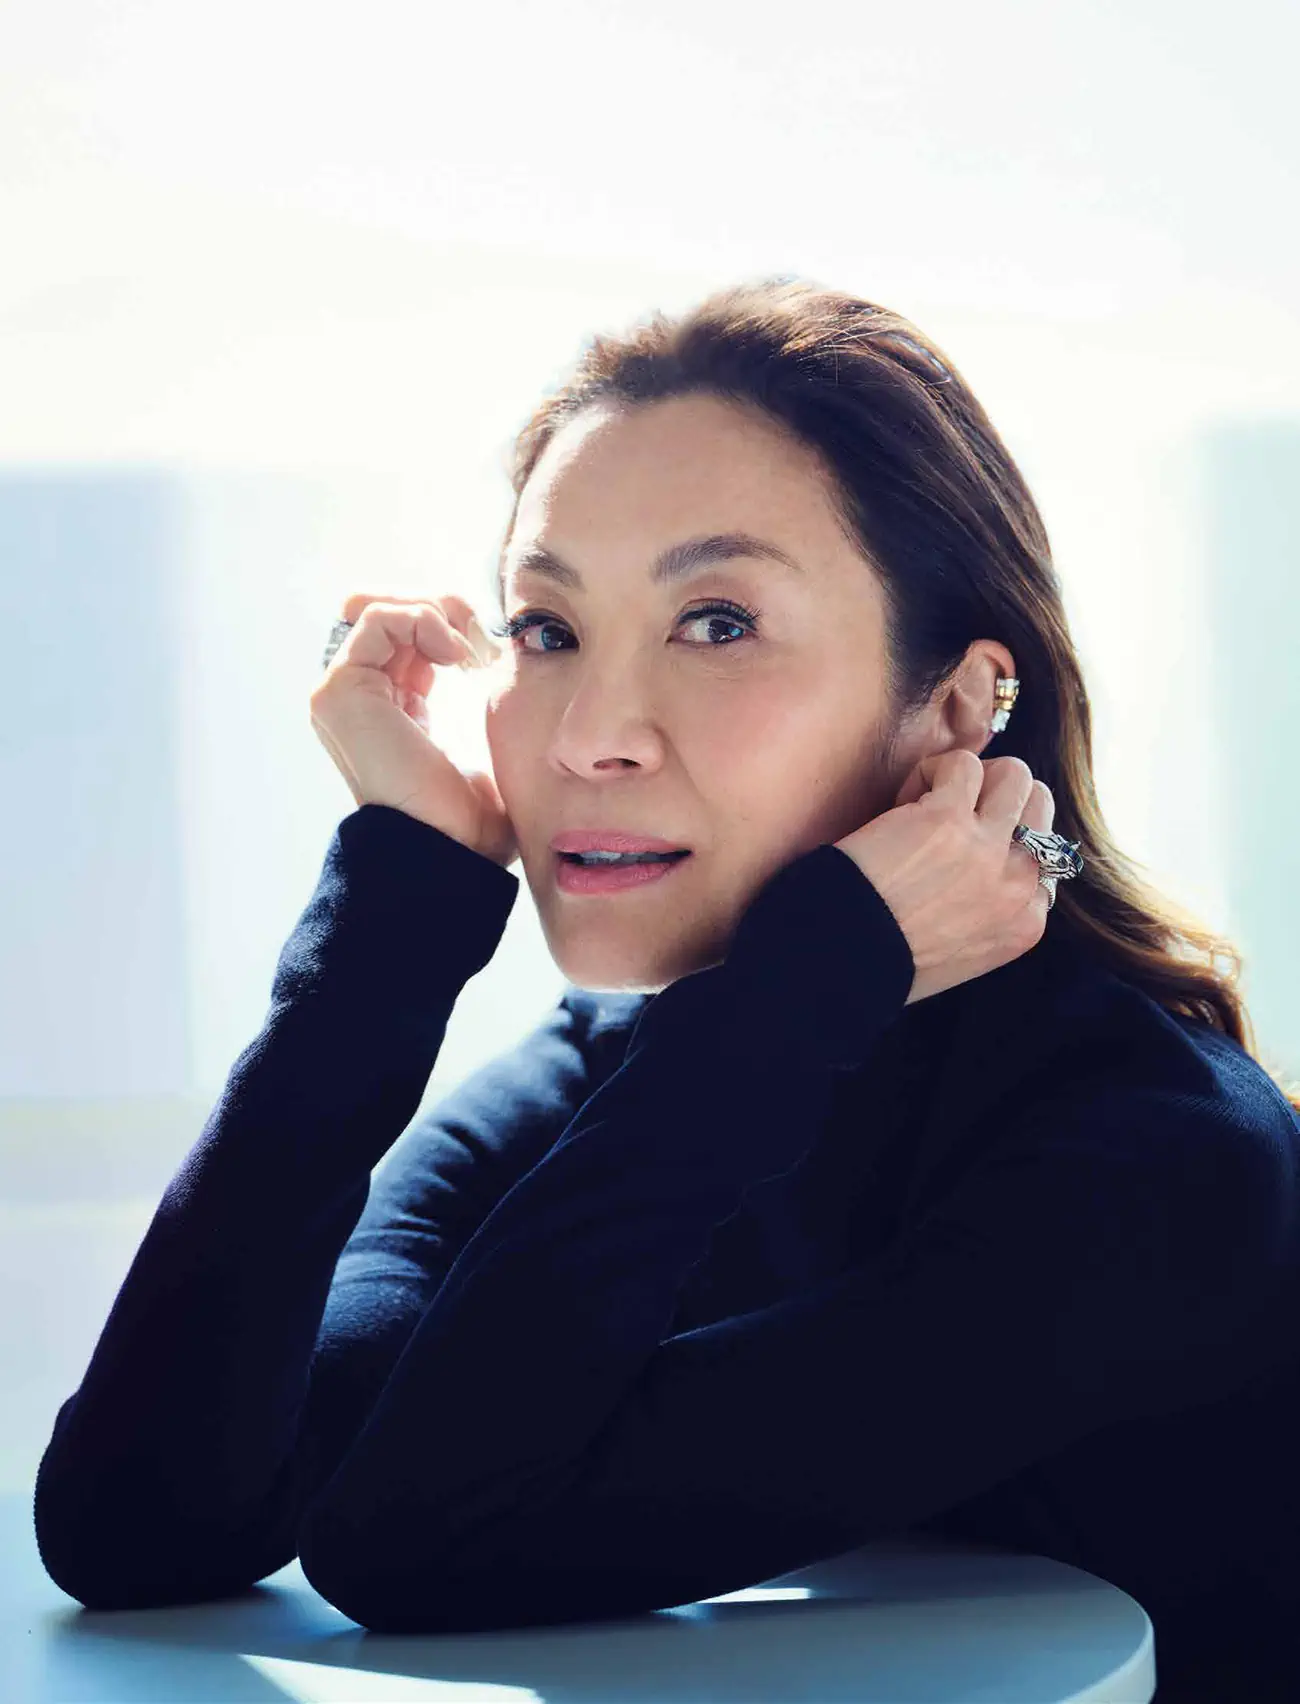 Michelle Yeoh covers Madame Figaro July 28th, 2023 by Julian Ungano